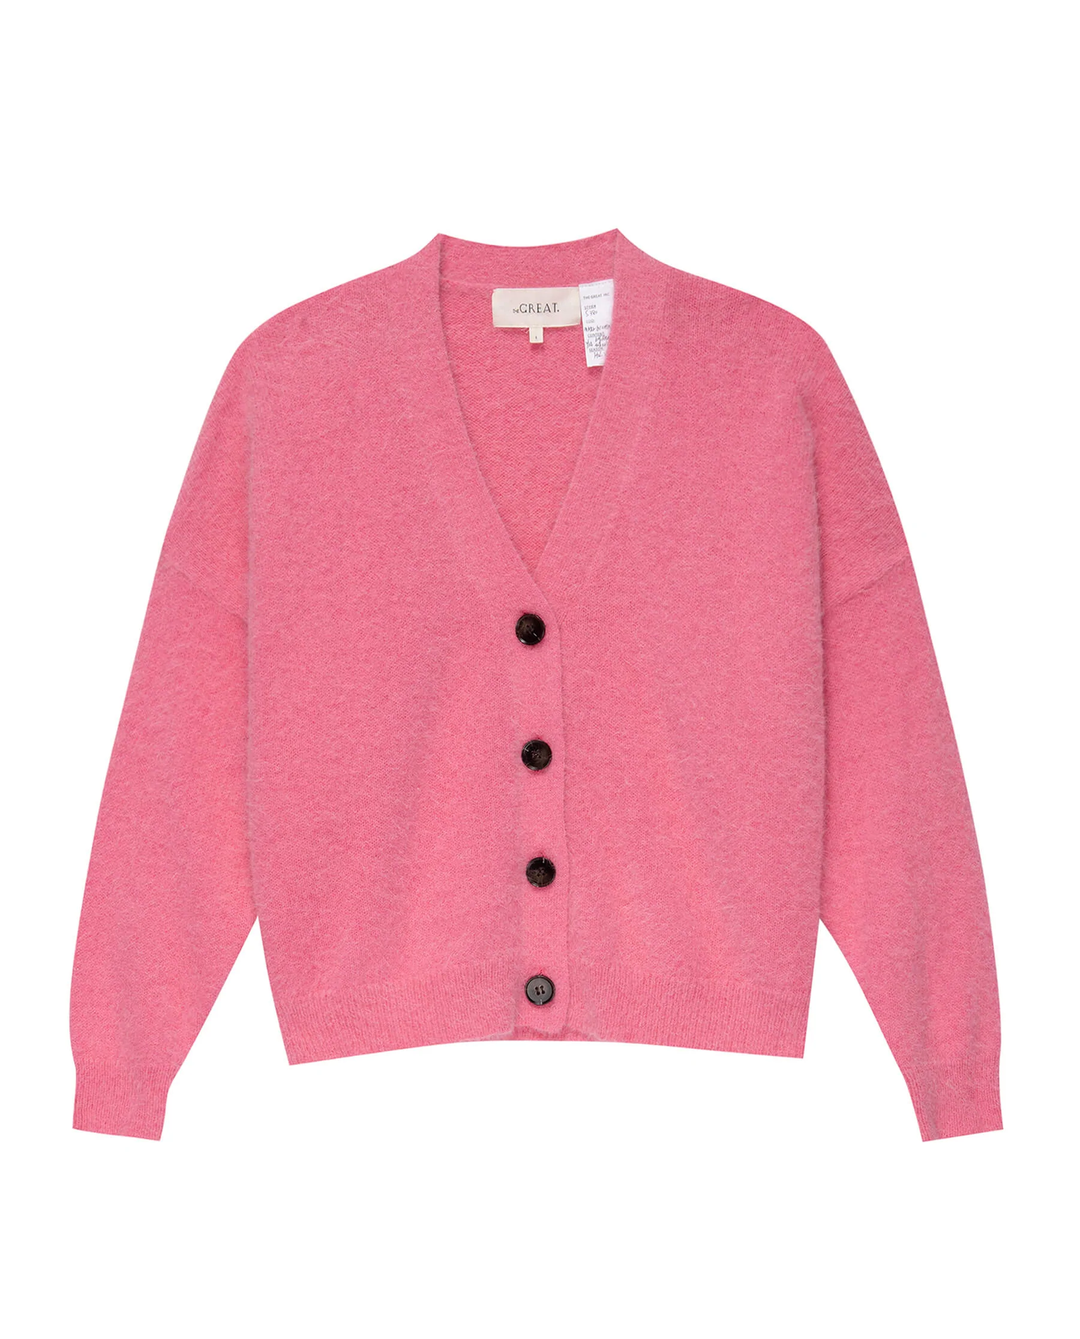 The Great - The Fluffy Slouch Cardigan in Cherry Blossom